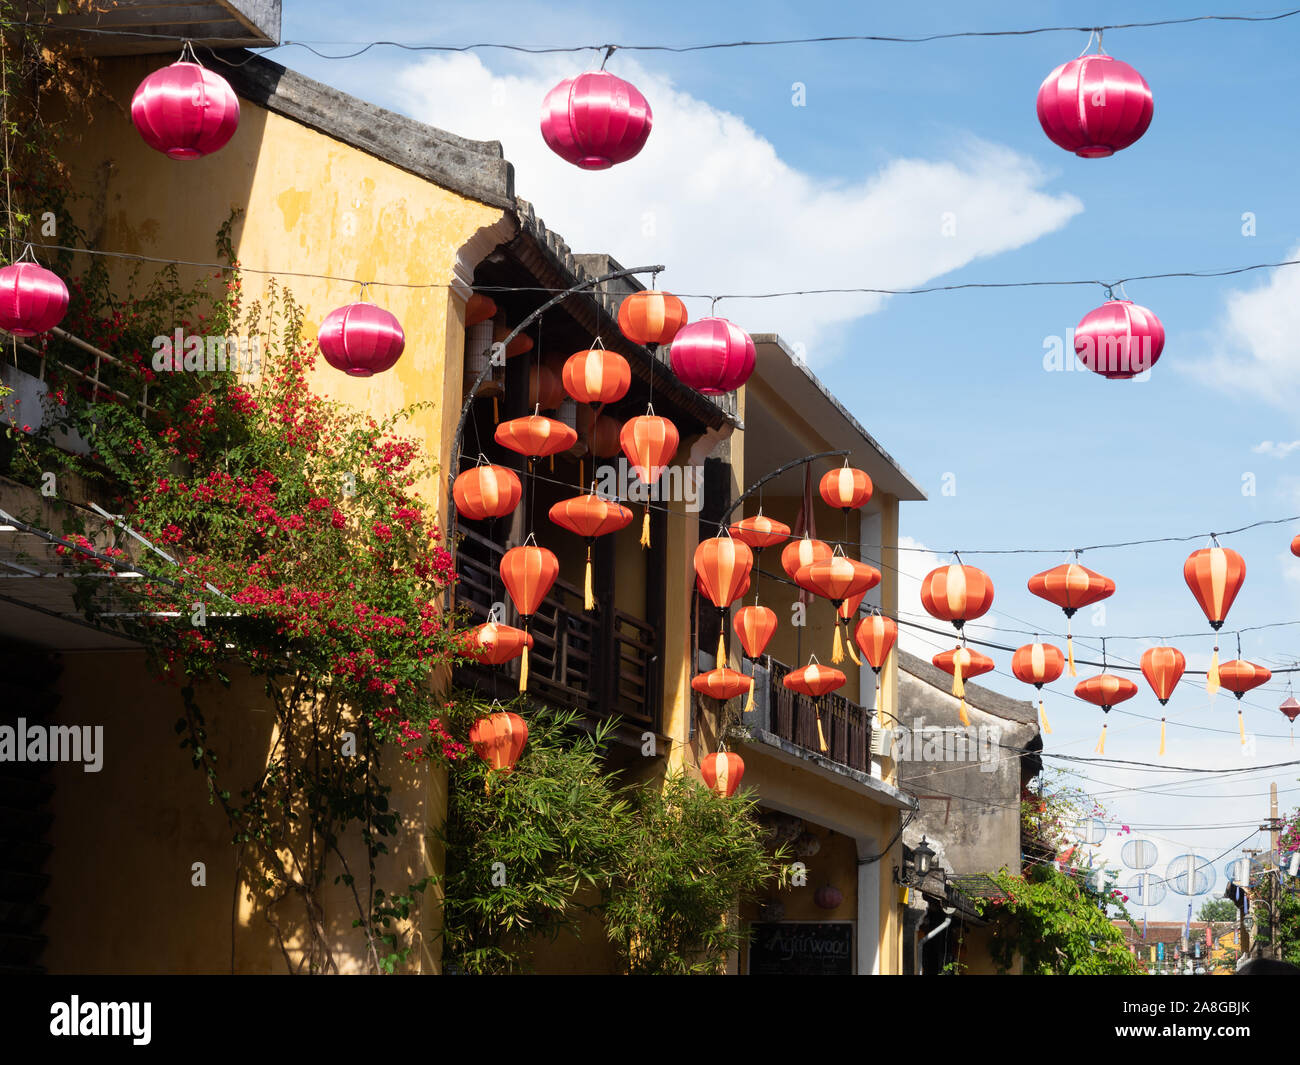 Fabric lanterns in orange and fuchsia strung between gold stucco buildings in the old city of Hoi An, Vietnam. Stock Photo